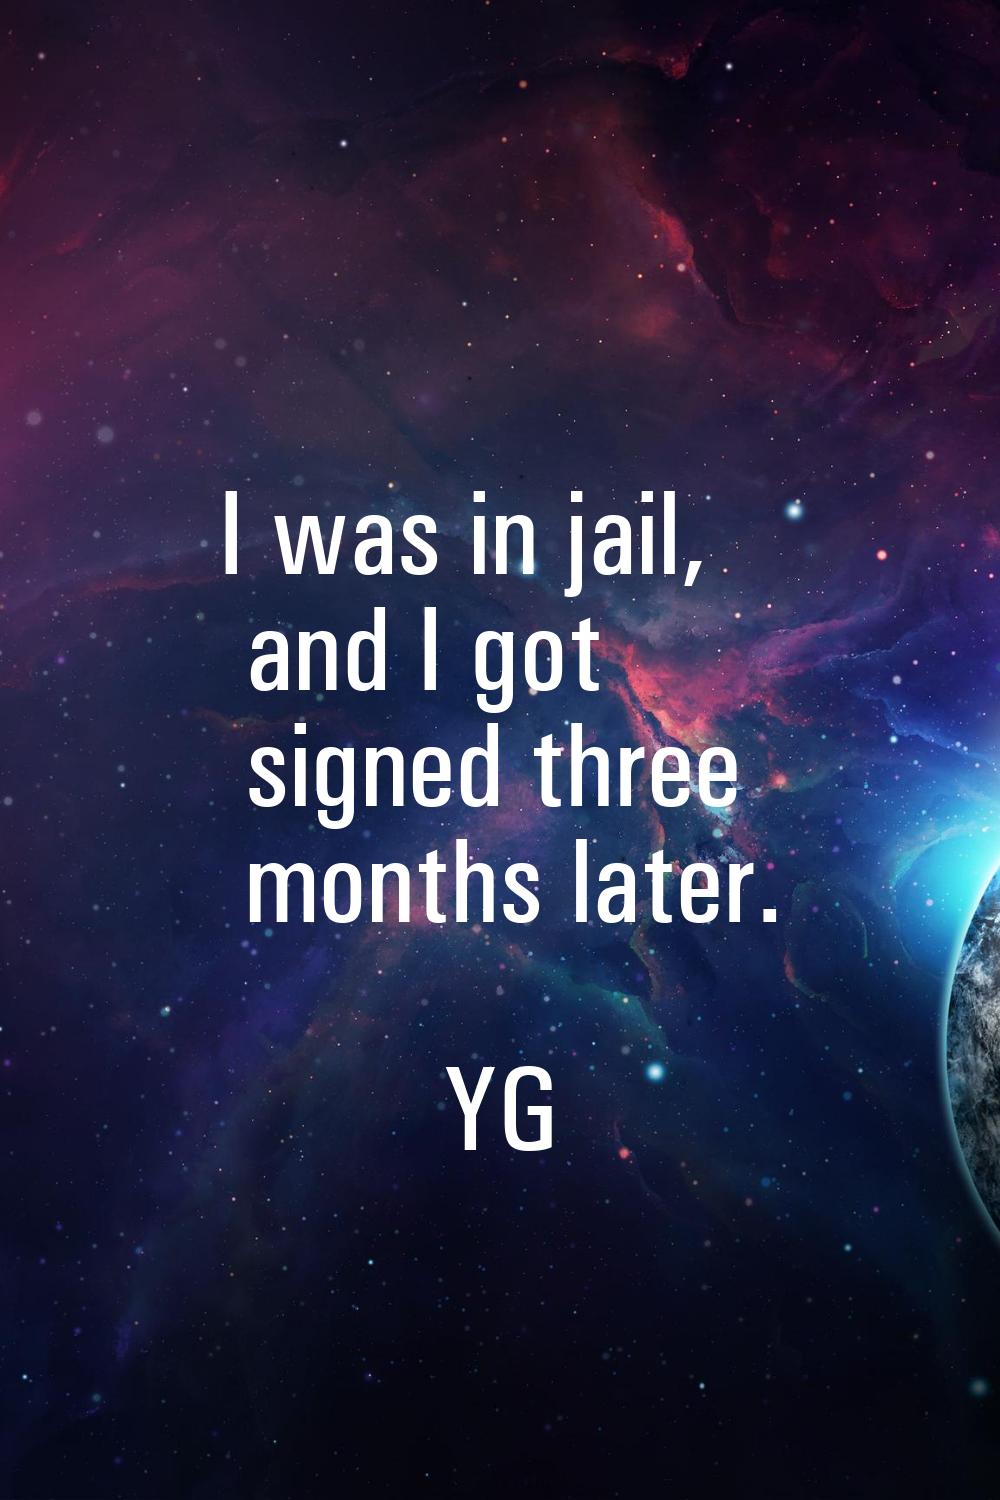 I was in jail, and I got signed three months later.